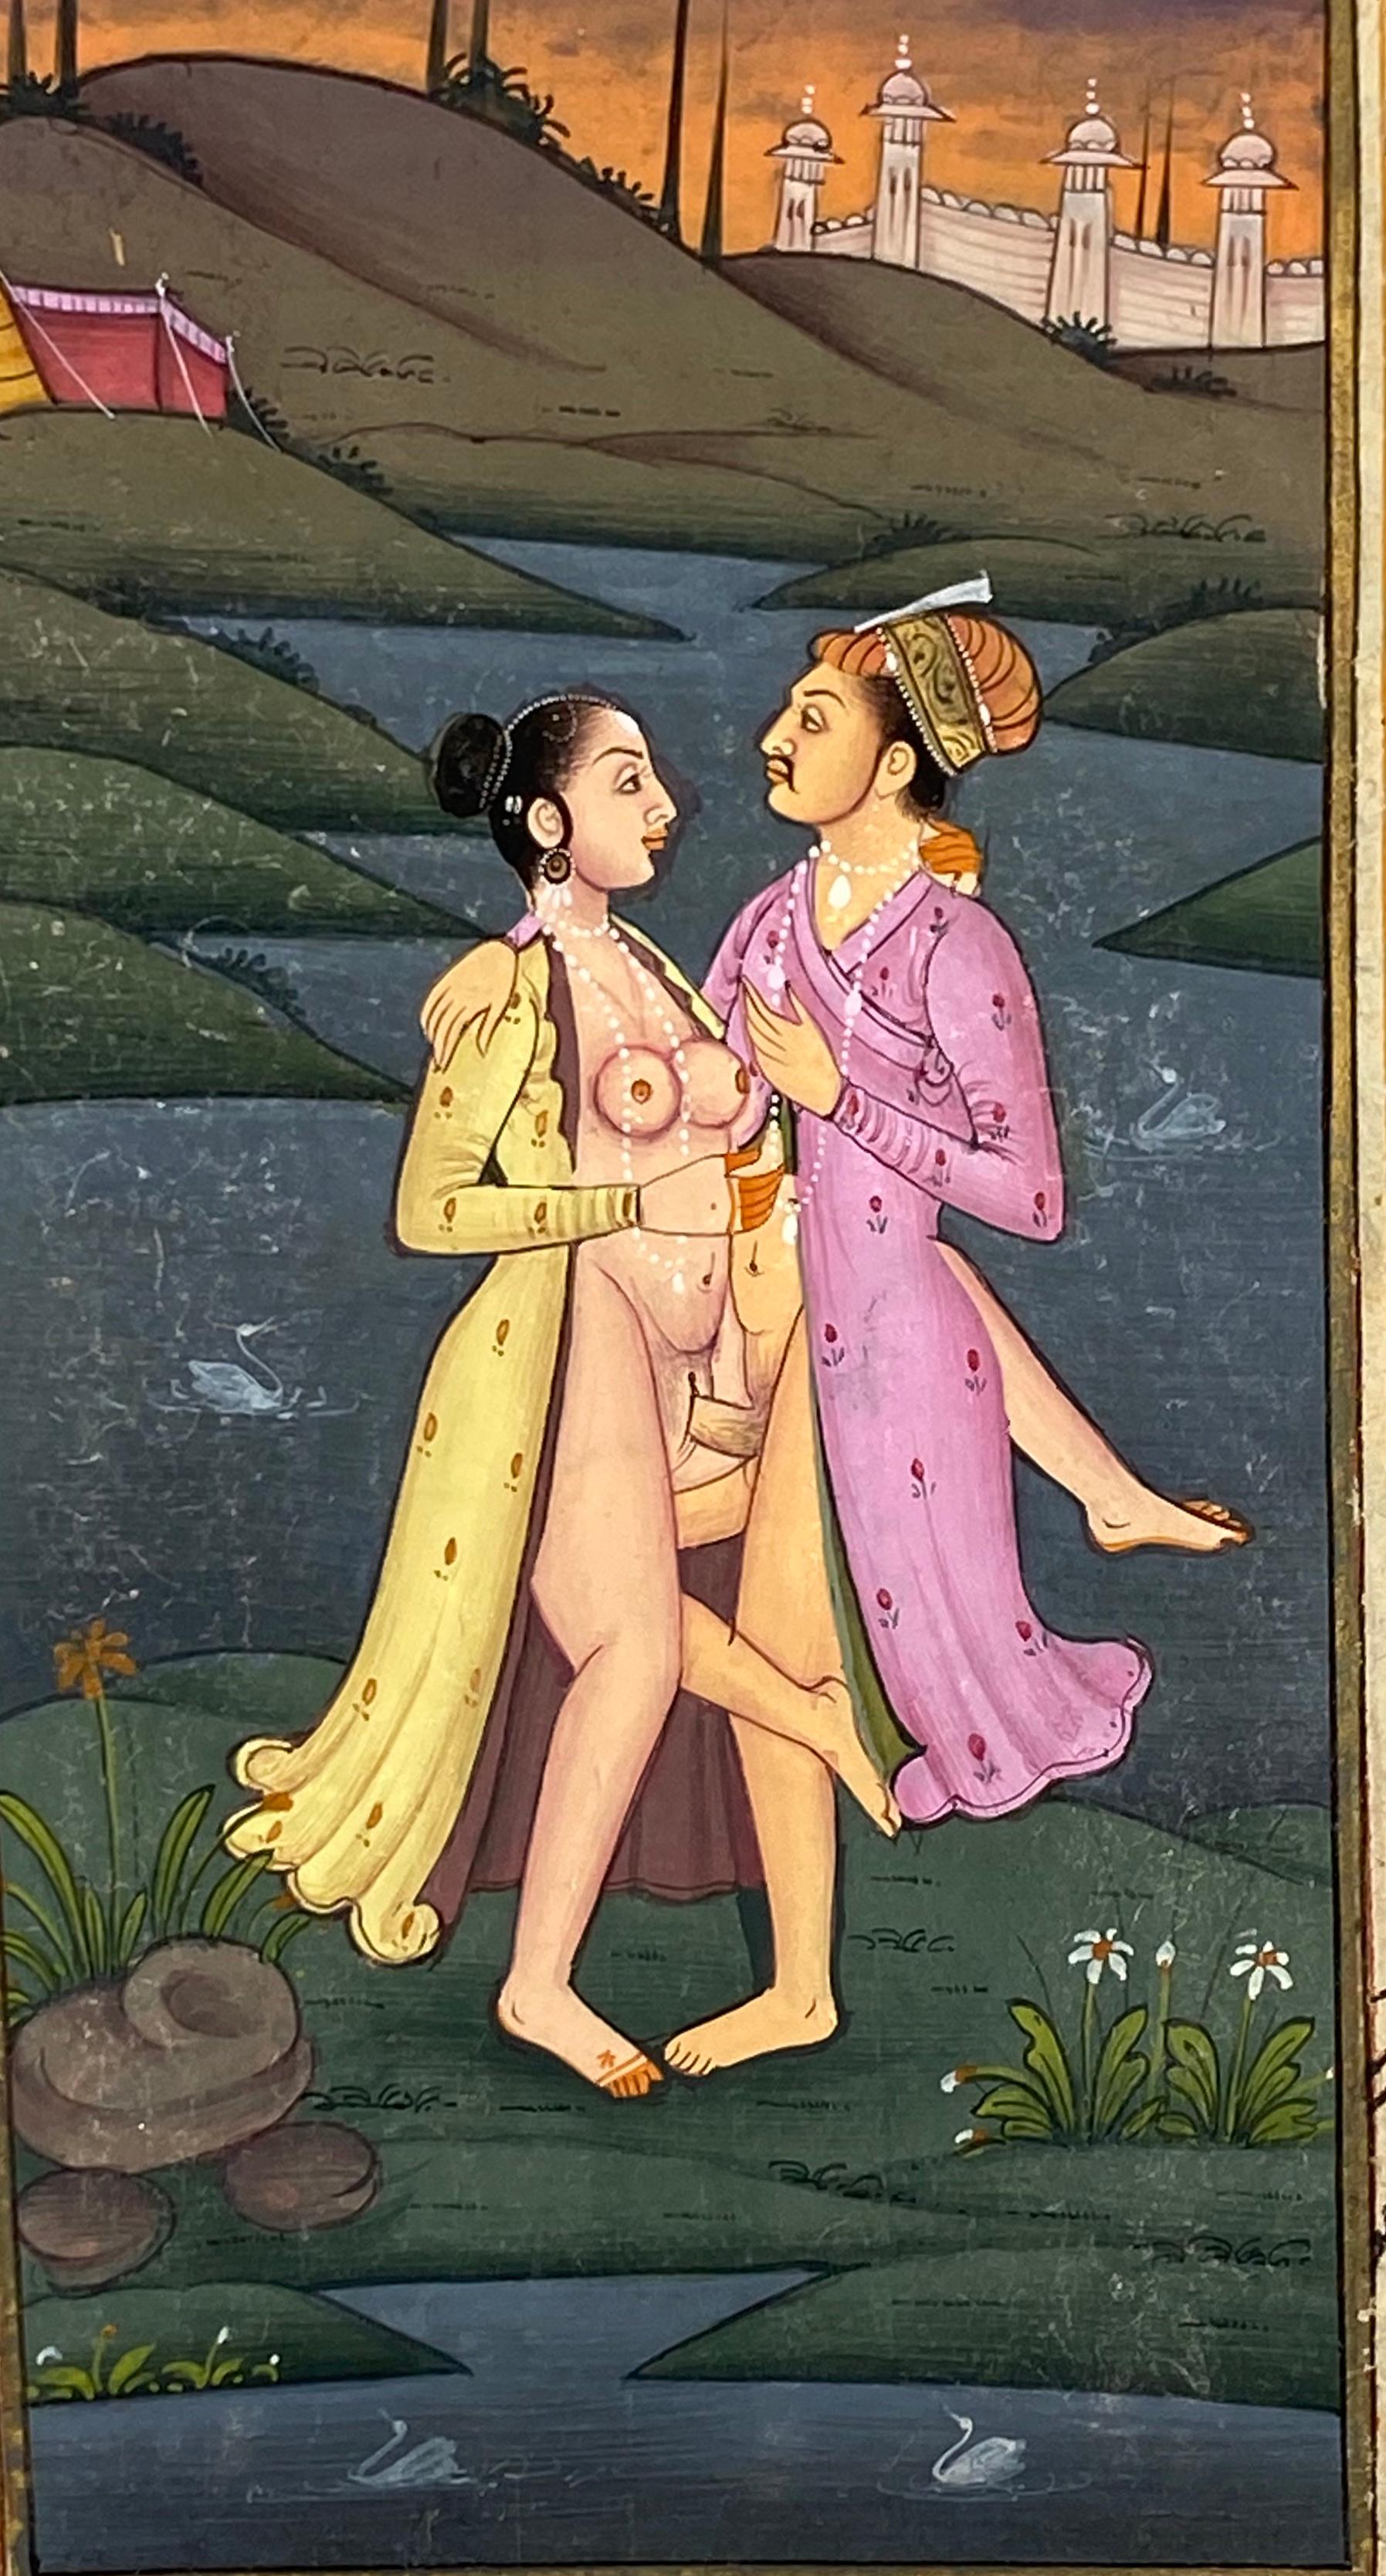 Unknown Figurative Painting - Mughal Prince engaging in Kama Sutra with a Danse